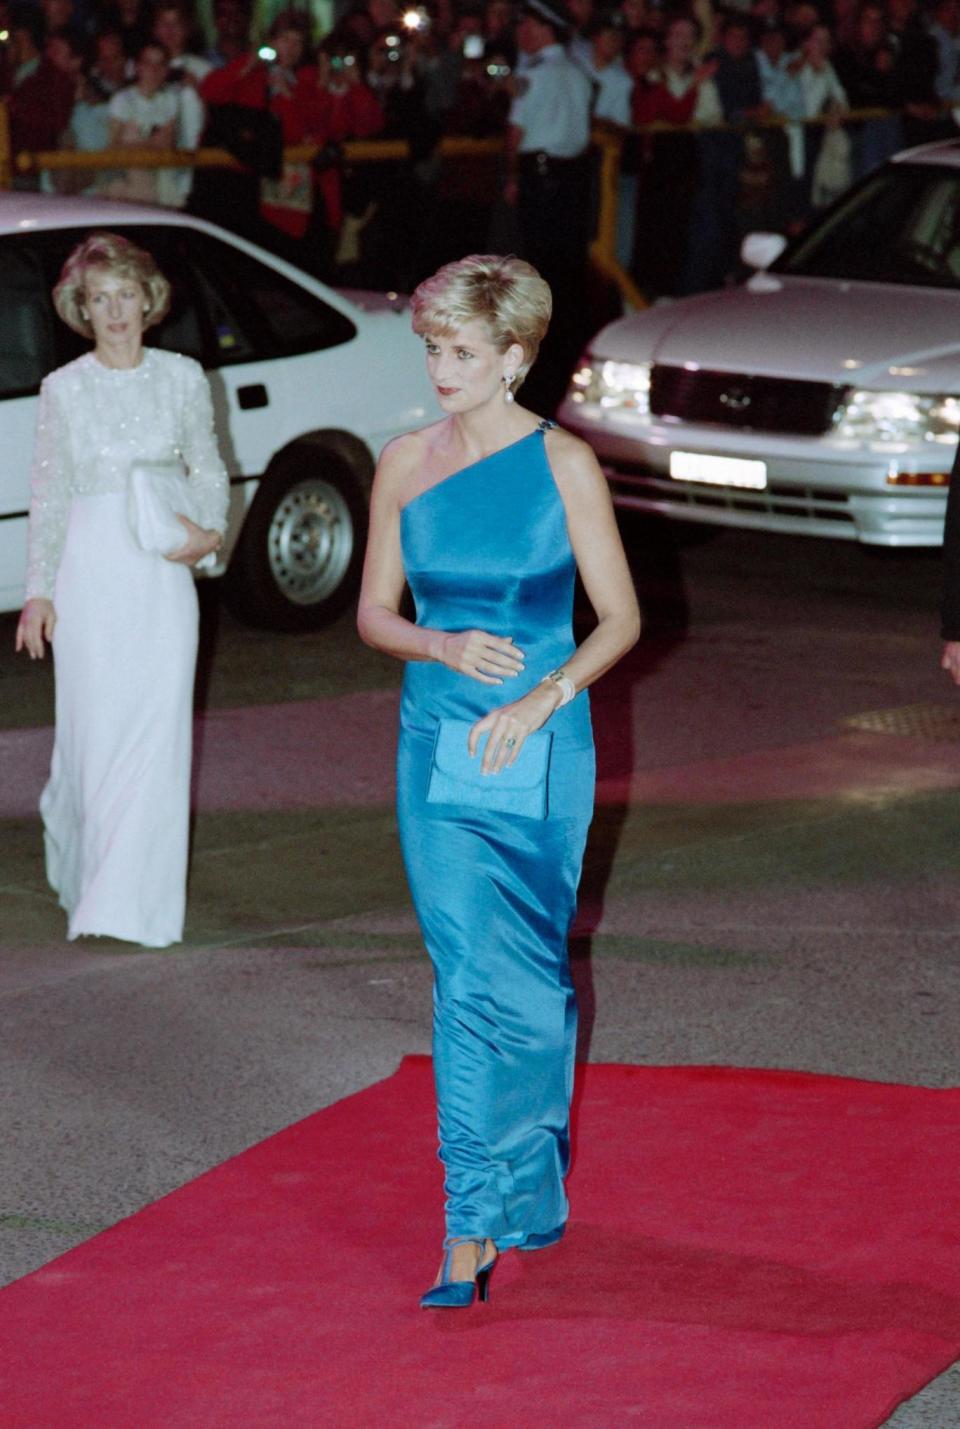 Princess Diana attending the Victor Chang Cardiac Research Institute dinner dance in Sydney in 1996 (AFP/Getty Images)